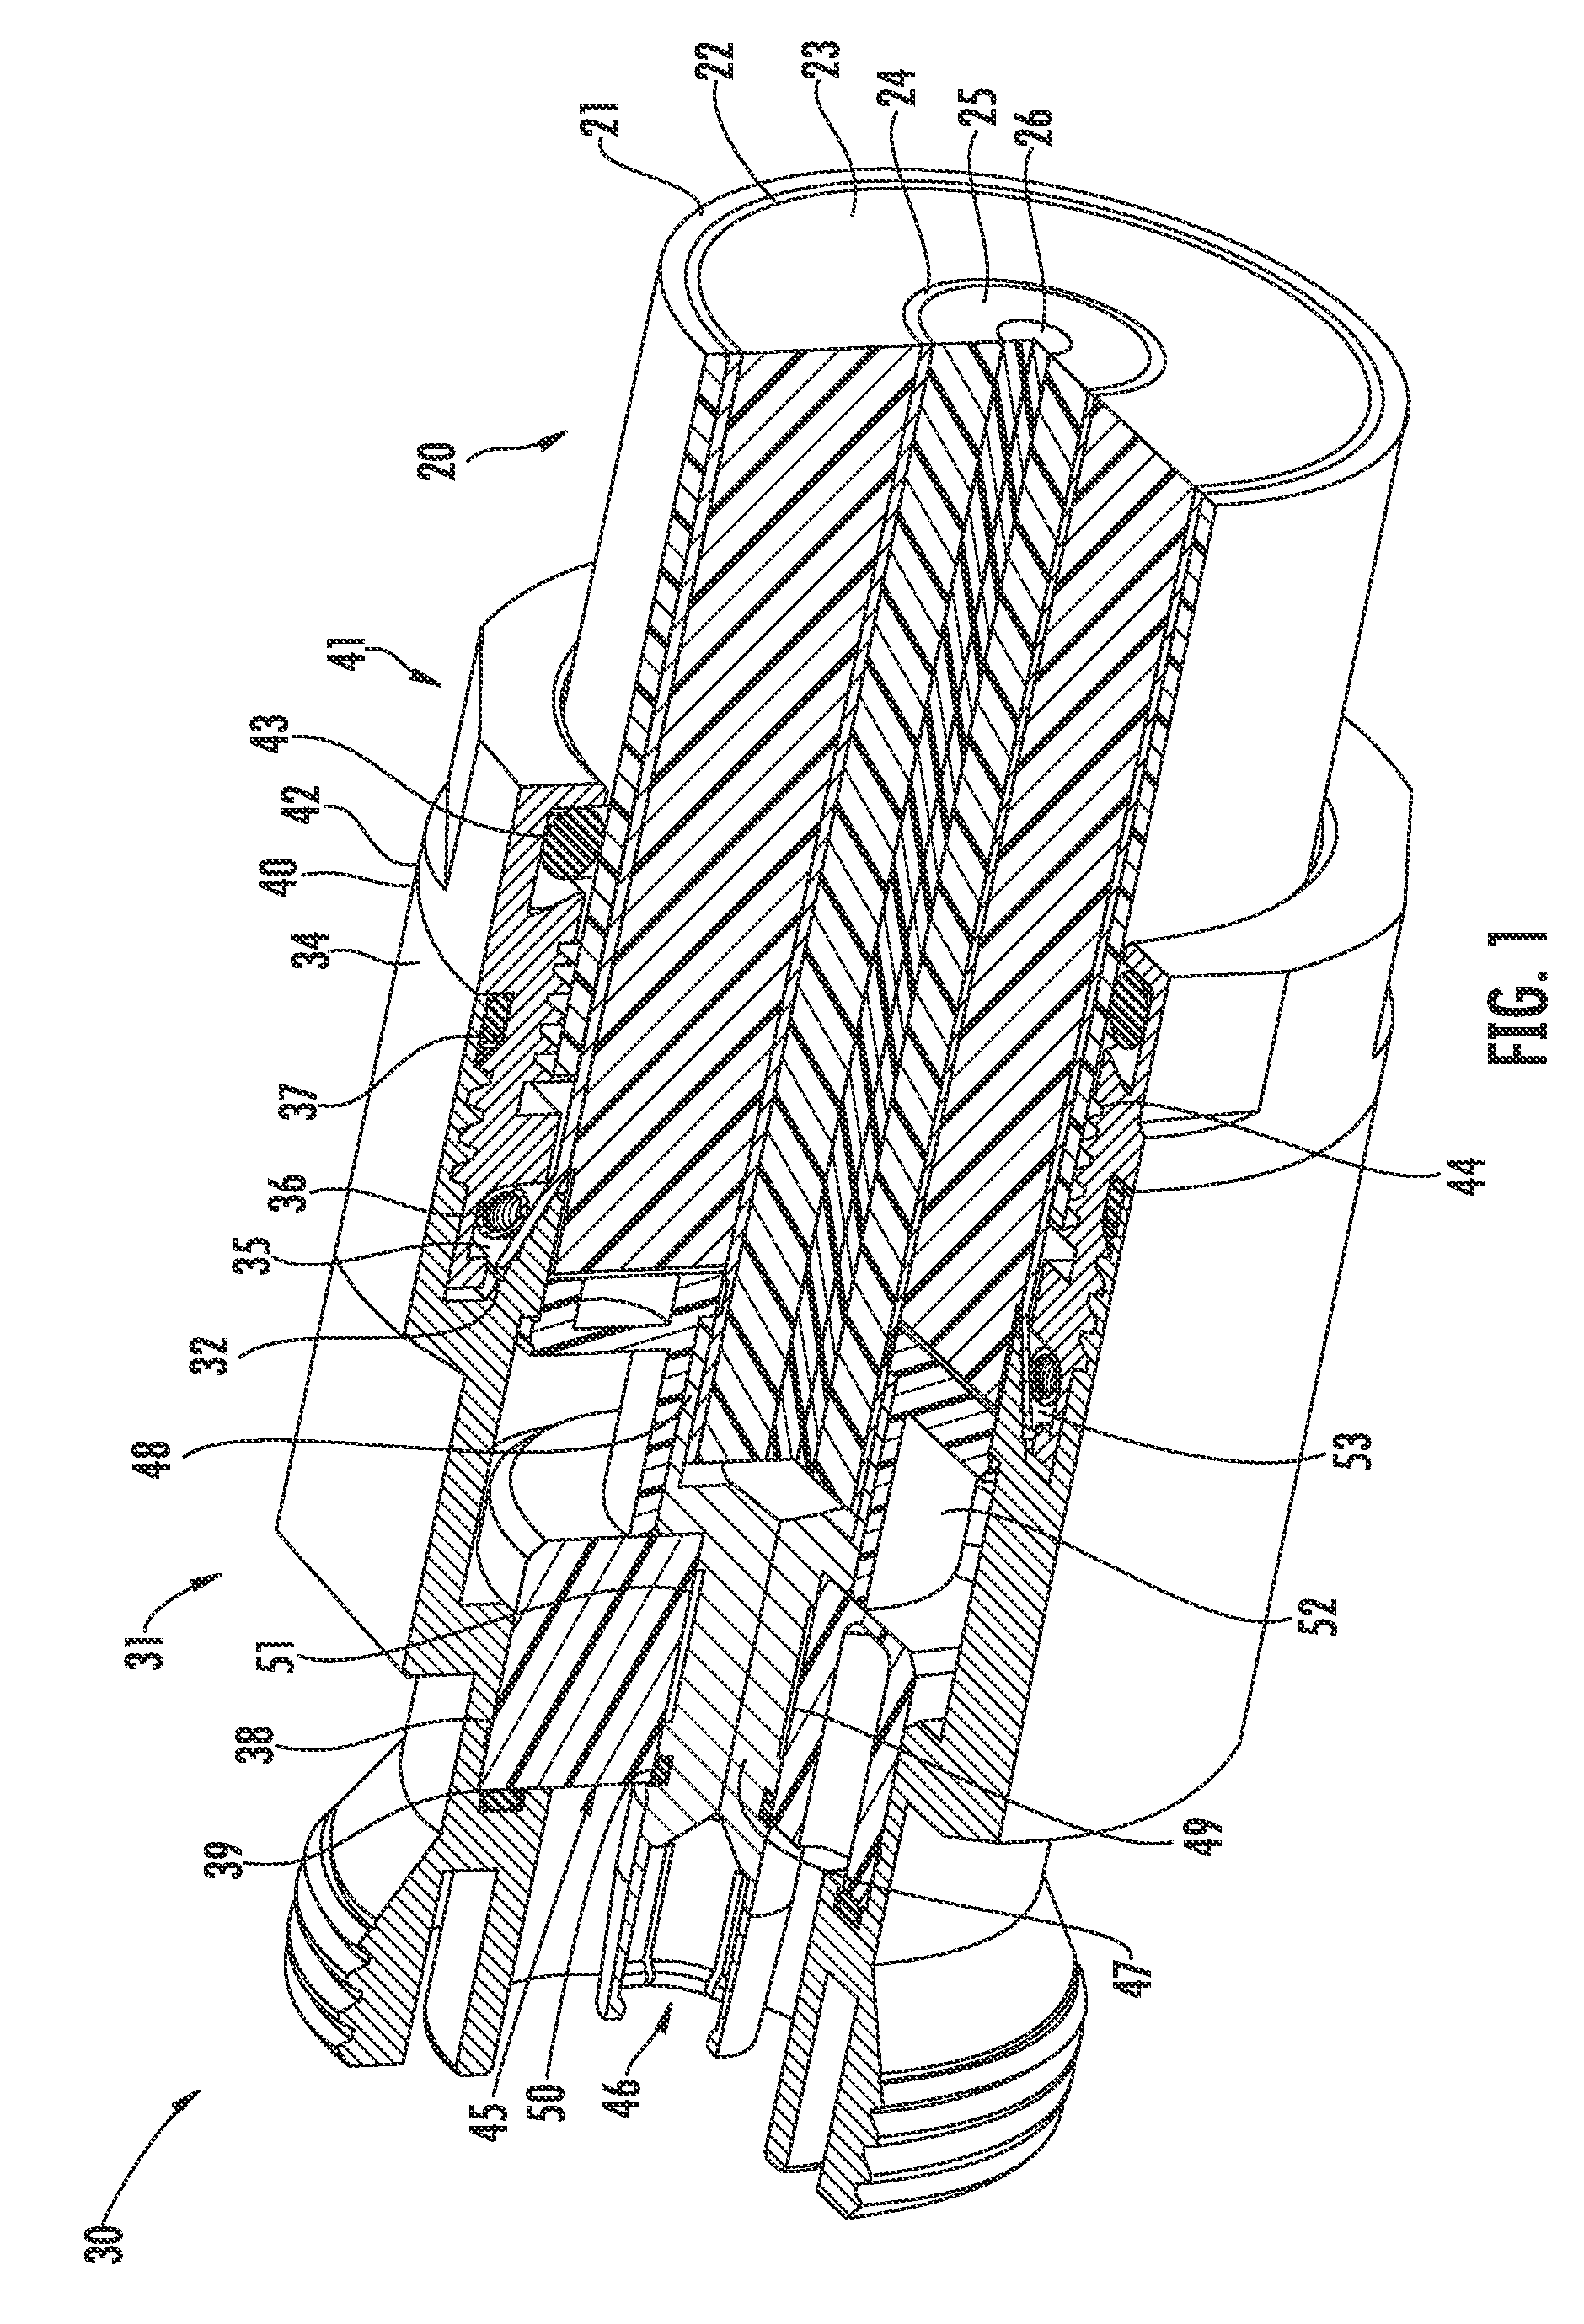 Connector for coaxial cable having rotational joint between insulator member and connector housing and associated methods